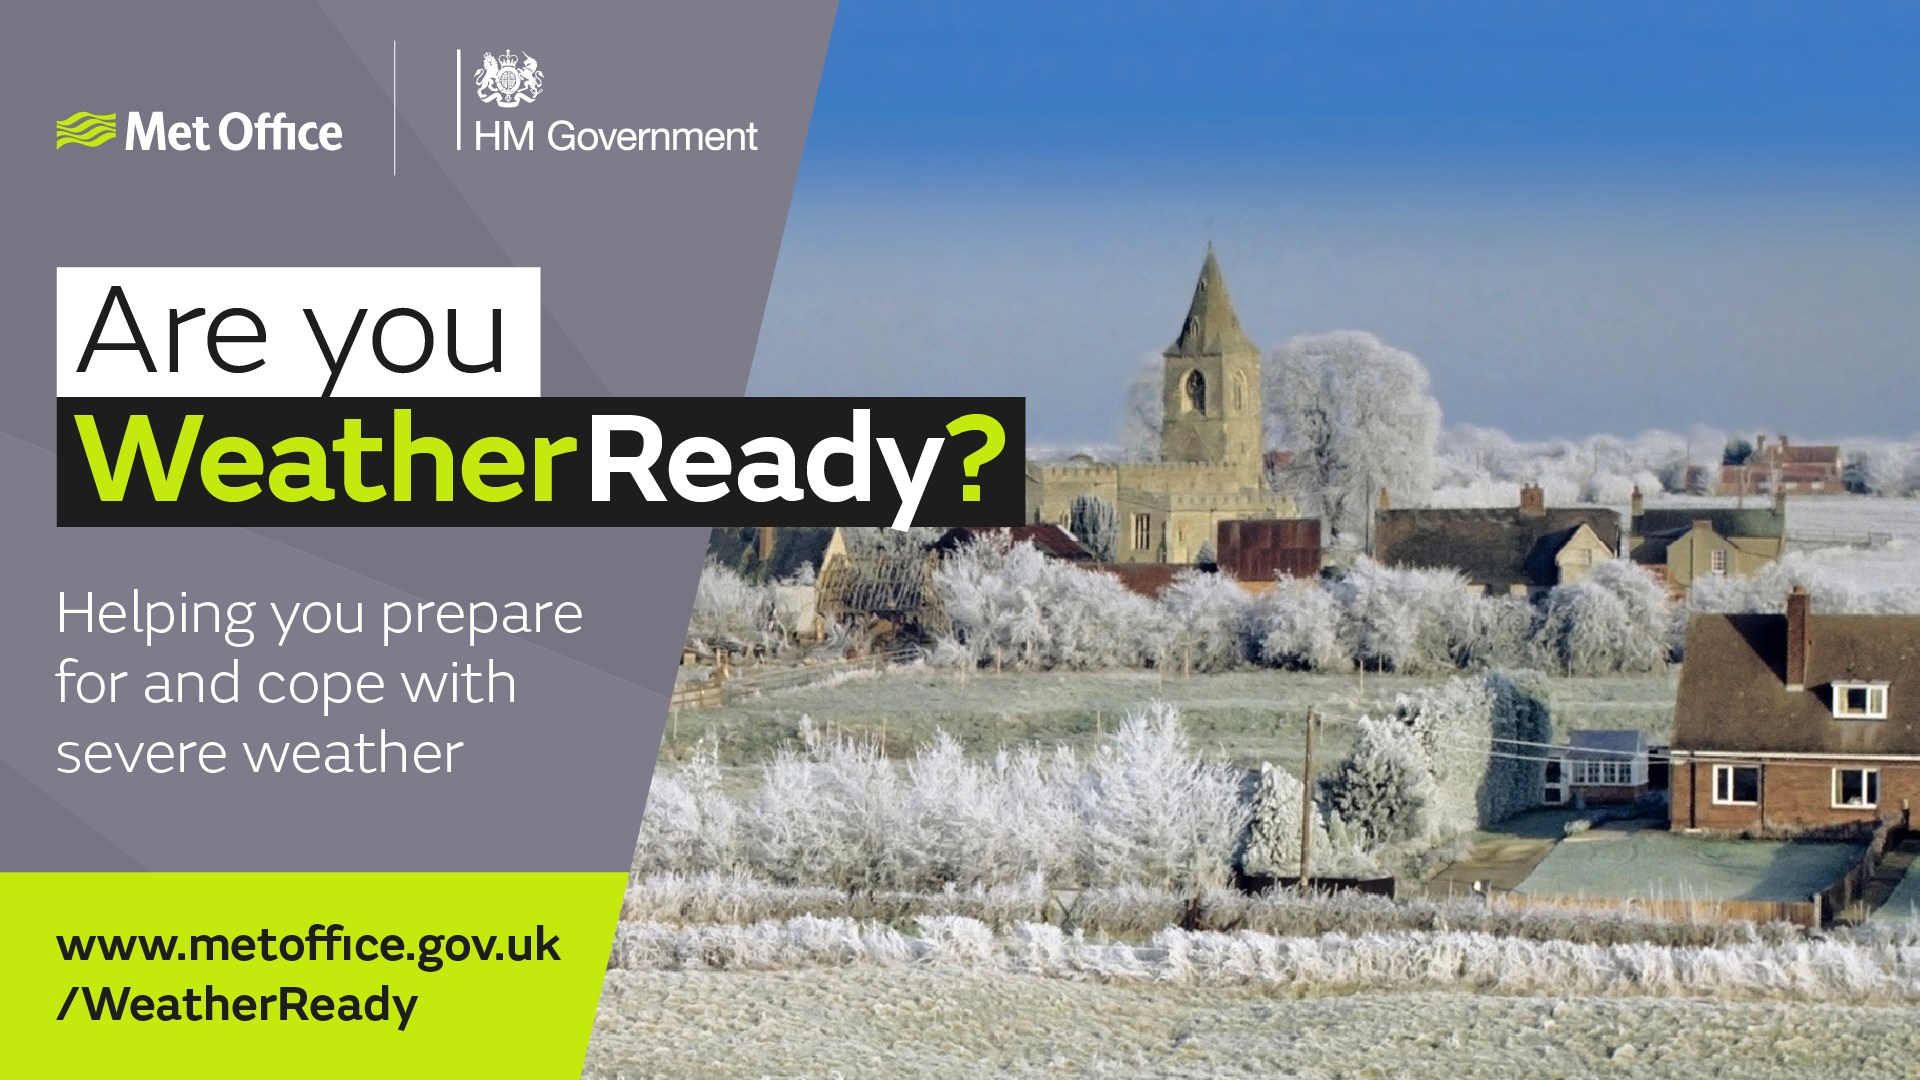 Met Office infographic. Met Office and HM government logos in the top left. Underneath is the messaging 'Are you WeatherReady? Helping you prepare for and cope with severe weather' followed by a link to a website: www.metoffice.gov.uk/WeatherReady . On the right there is an image of a wintry scene of a residential area and frosty looking field.